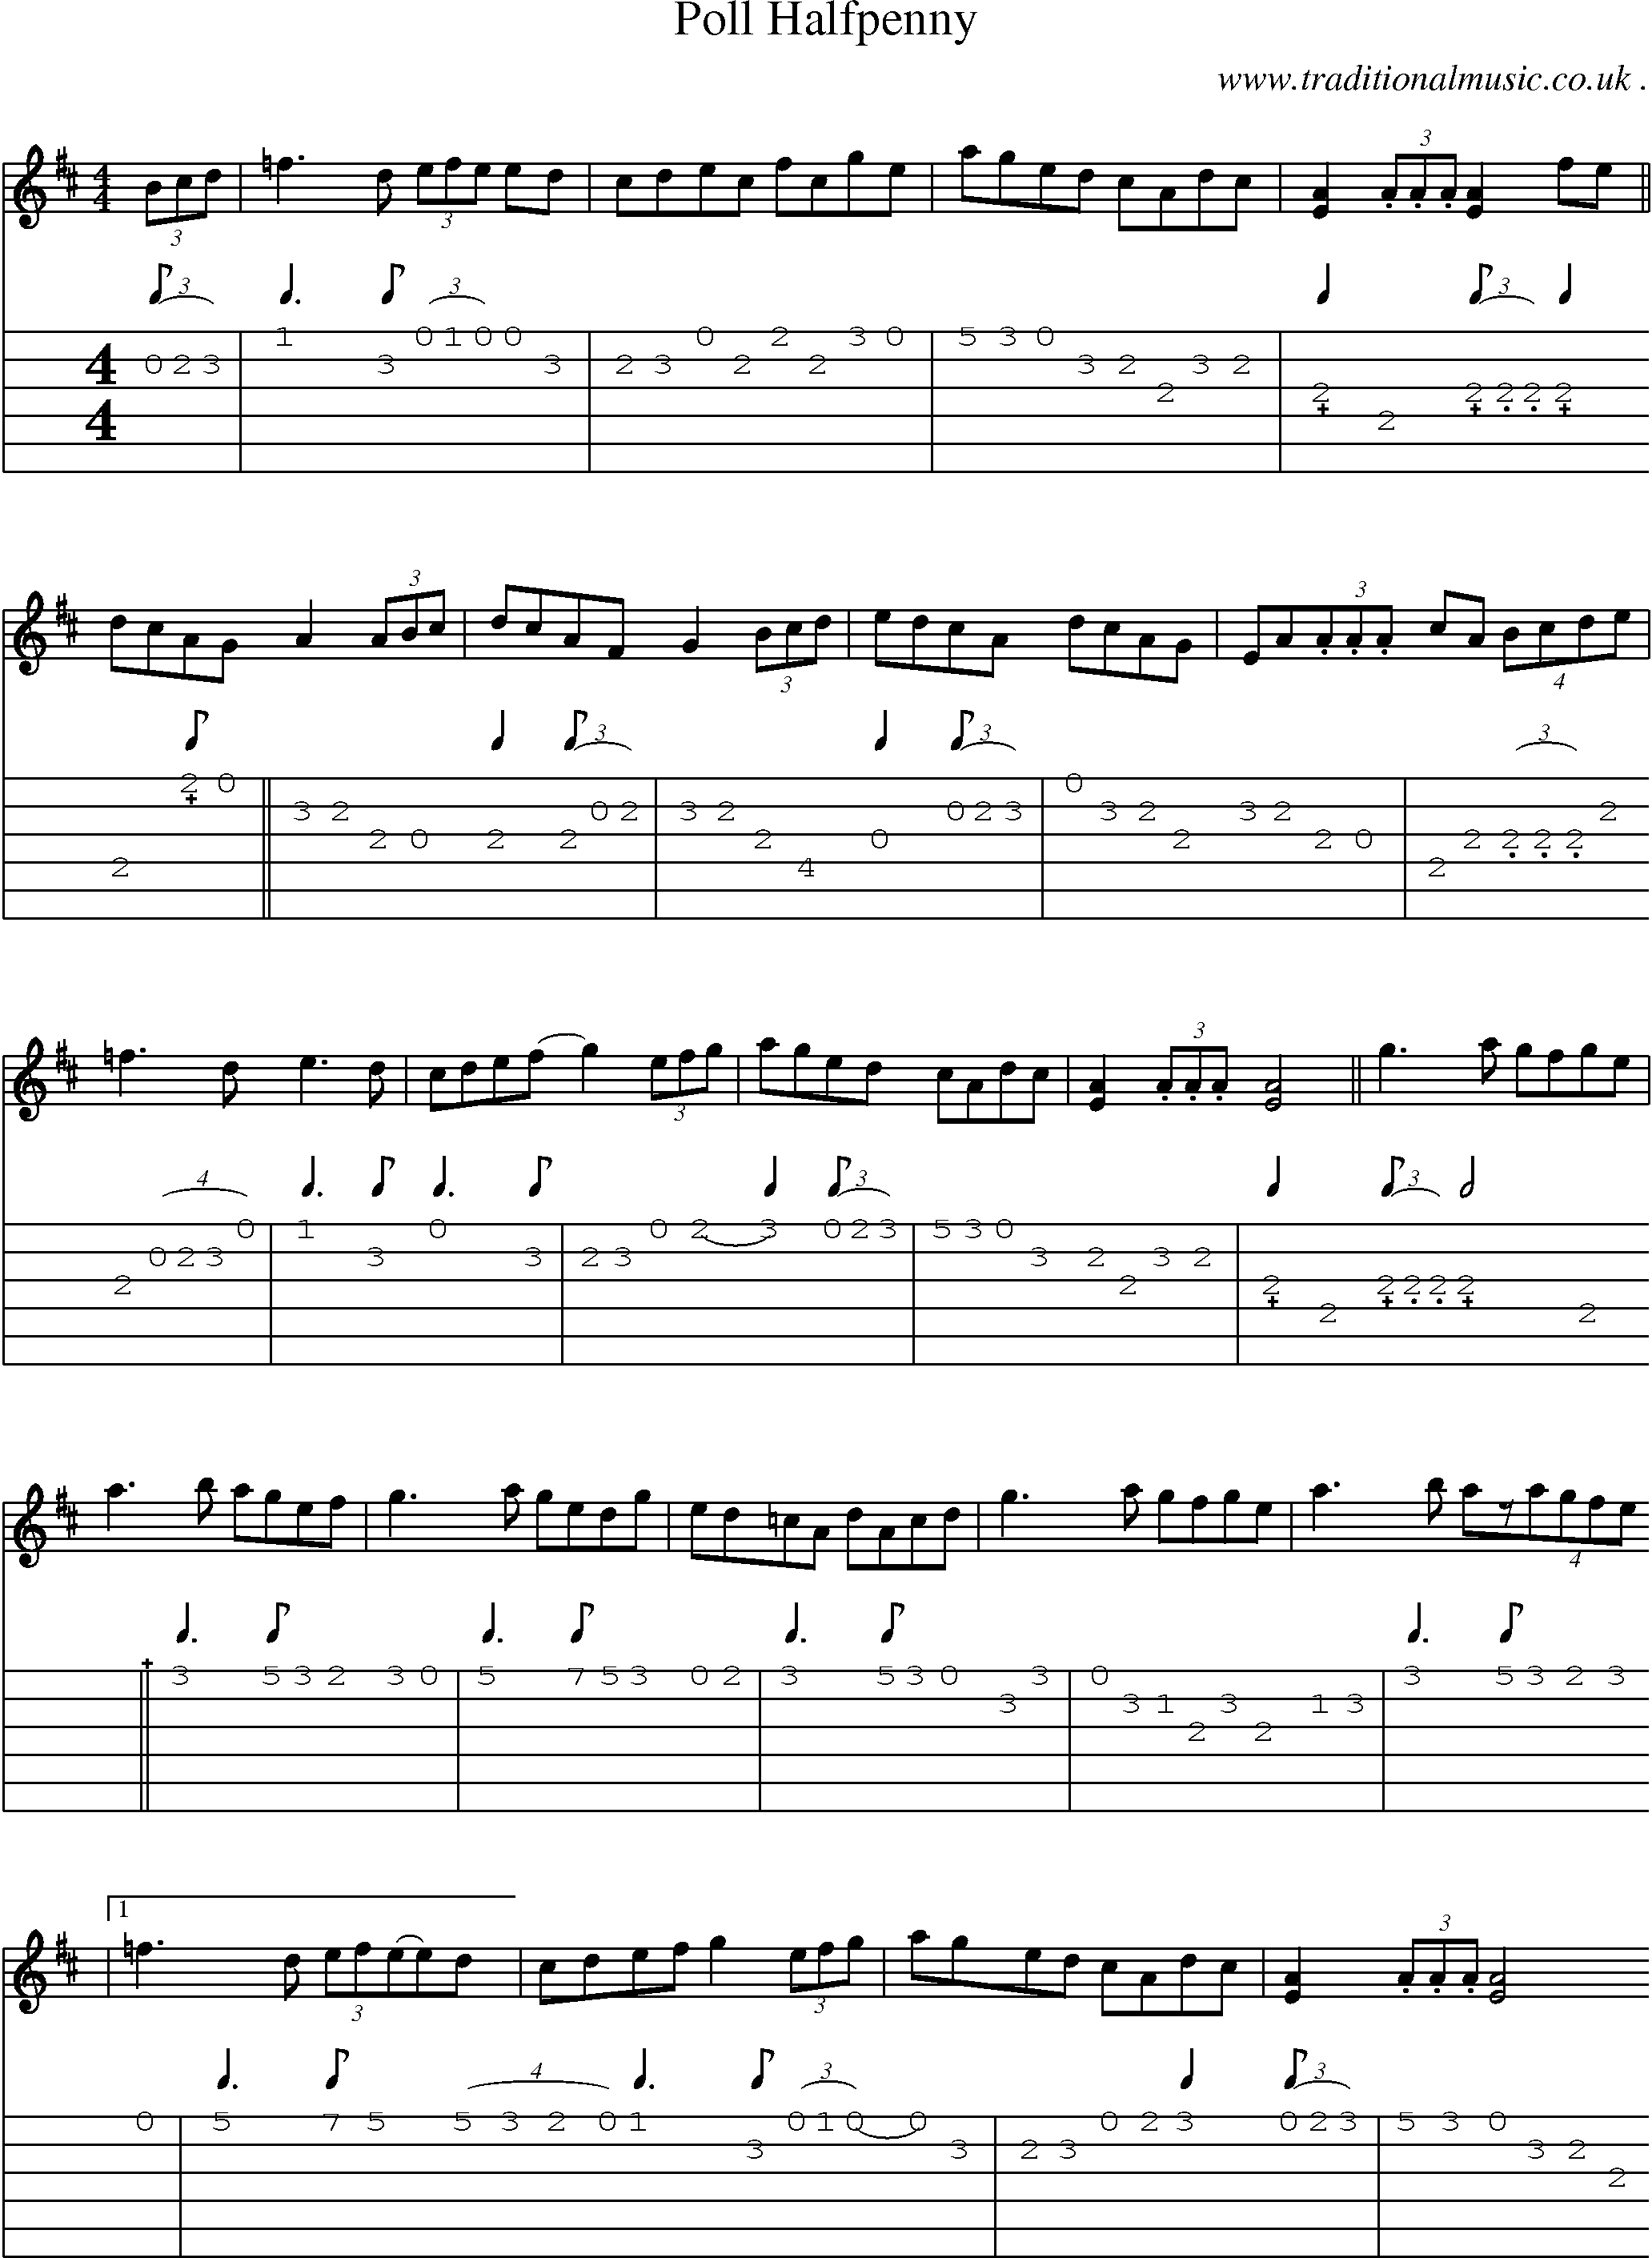 Sheet-Music and Guitar Tabs for Poll Halfpenny